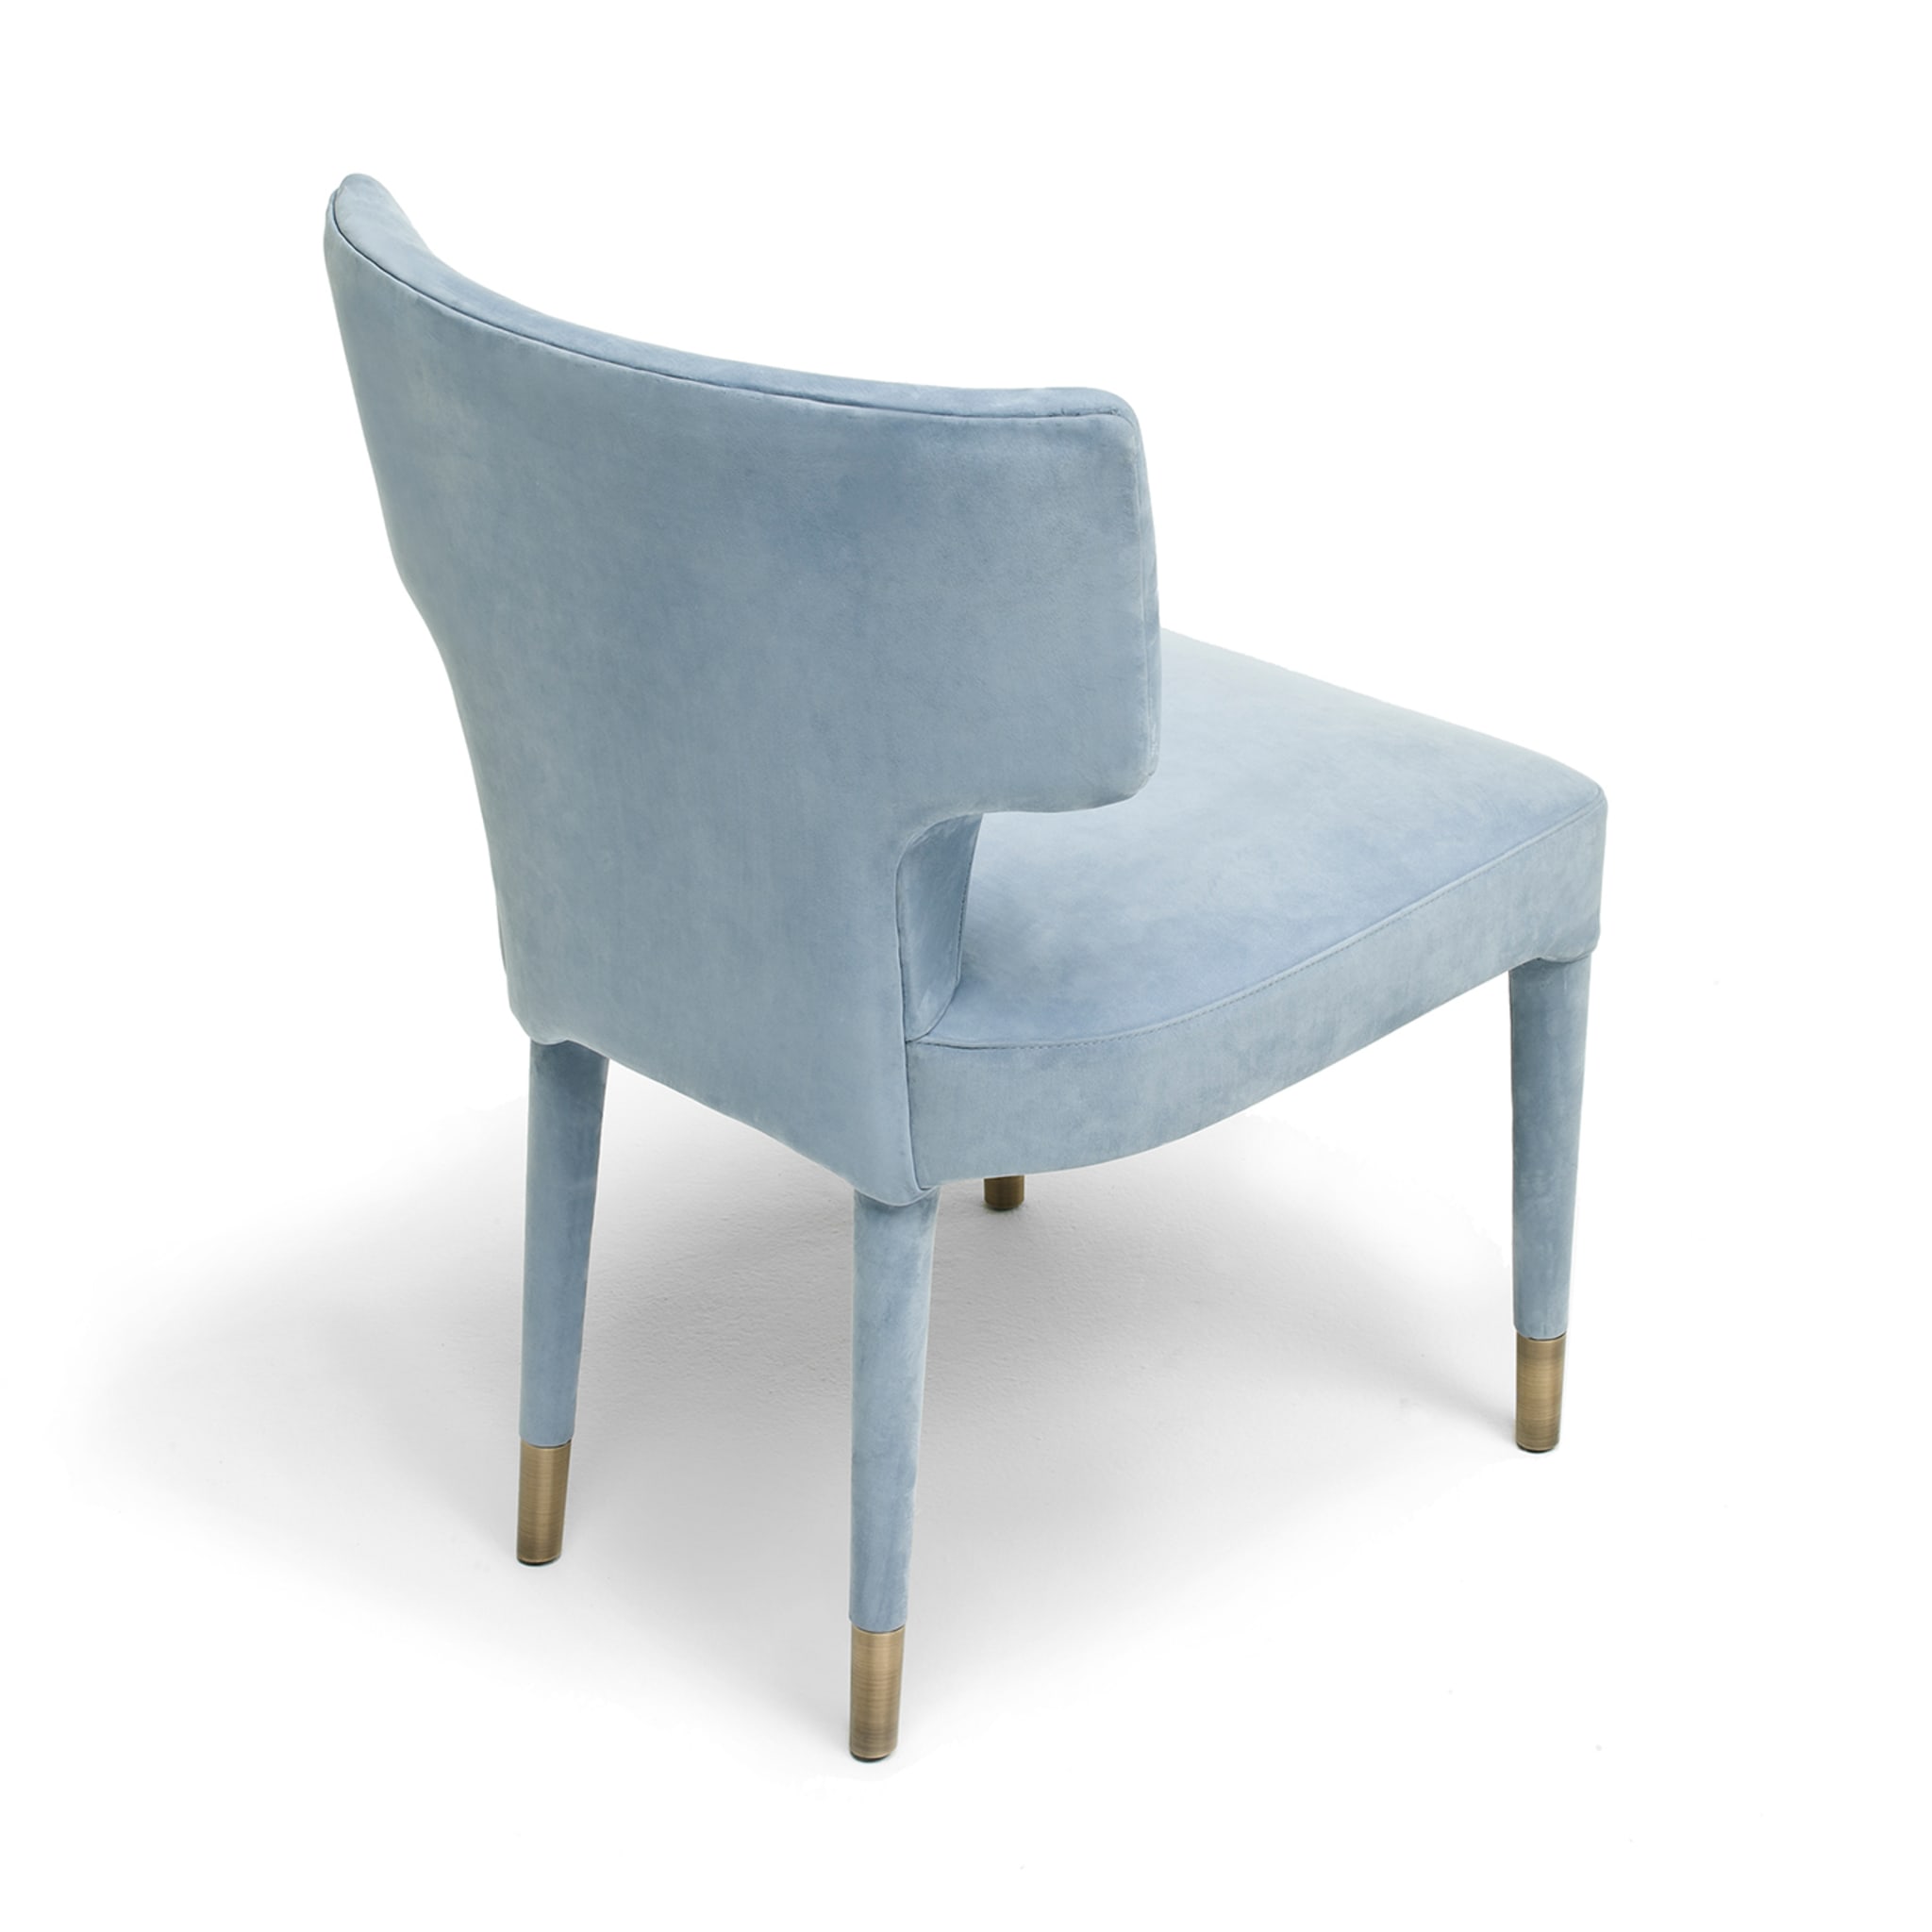 Martinica Dining Chair by Dainelli Studio - Alternative view 2